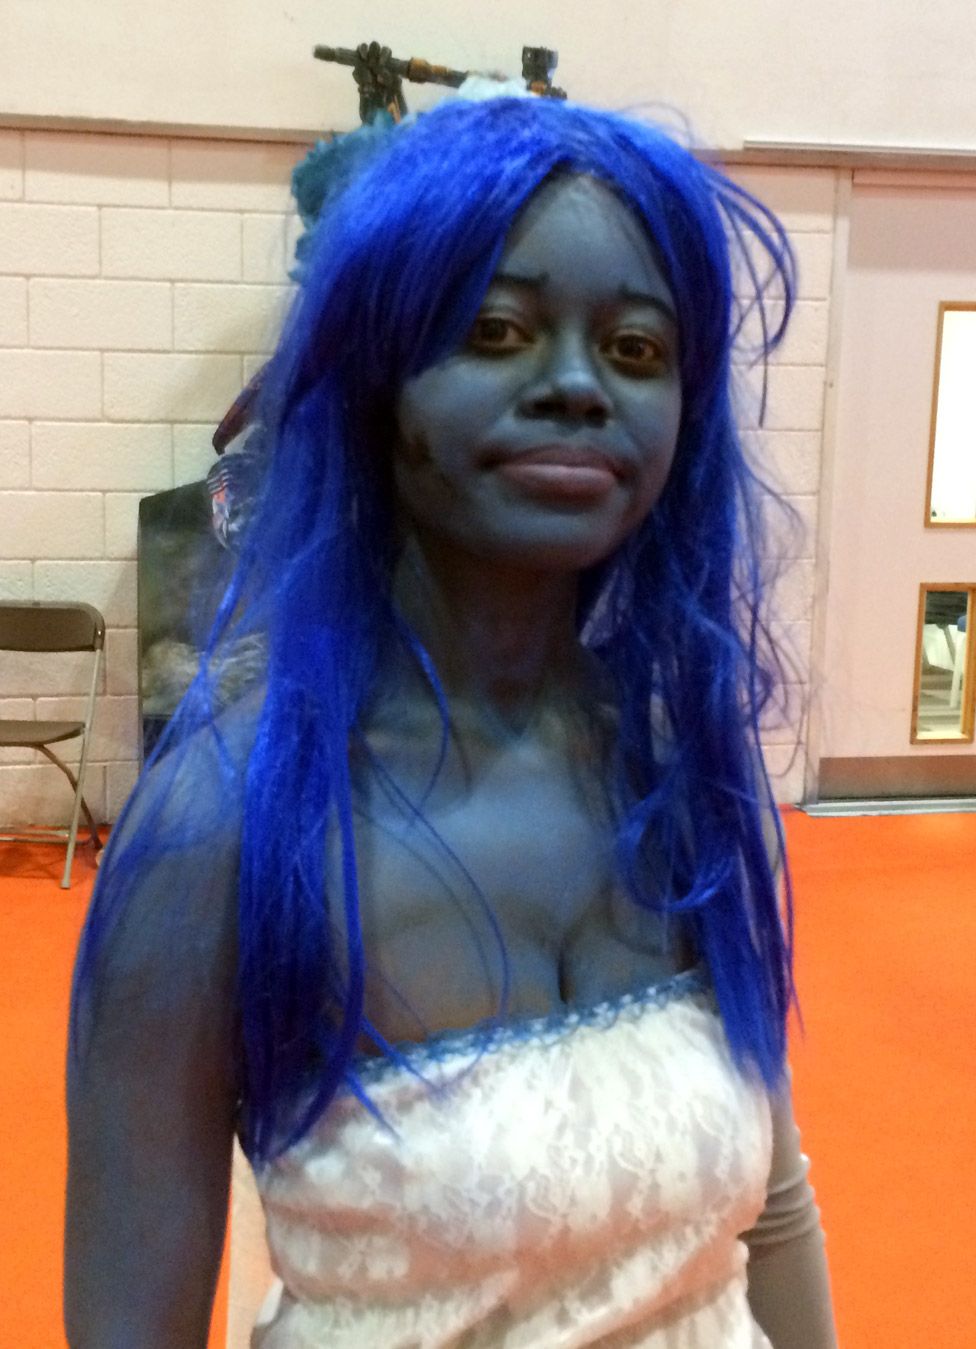 Samantha Prosper - as Emily from the film The Corpse Bride